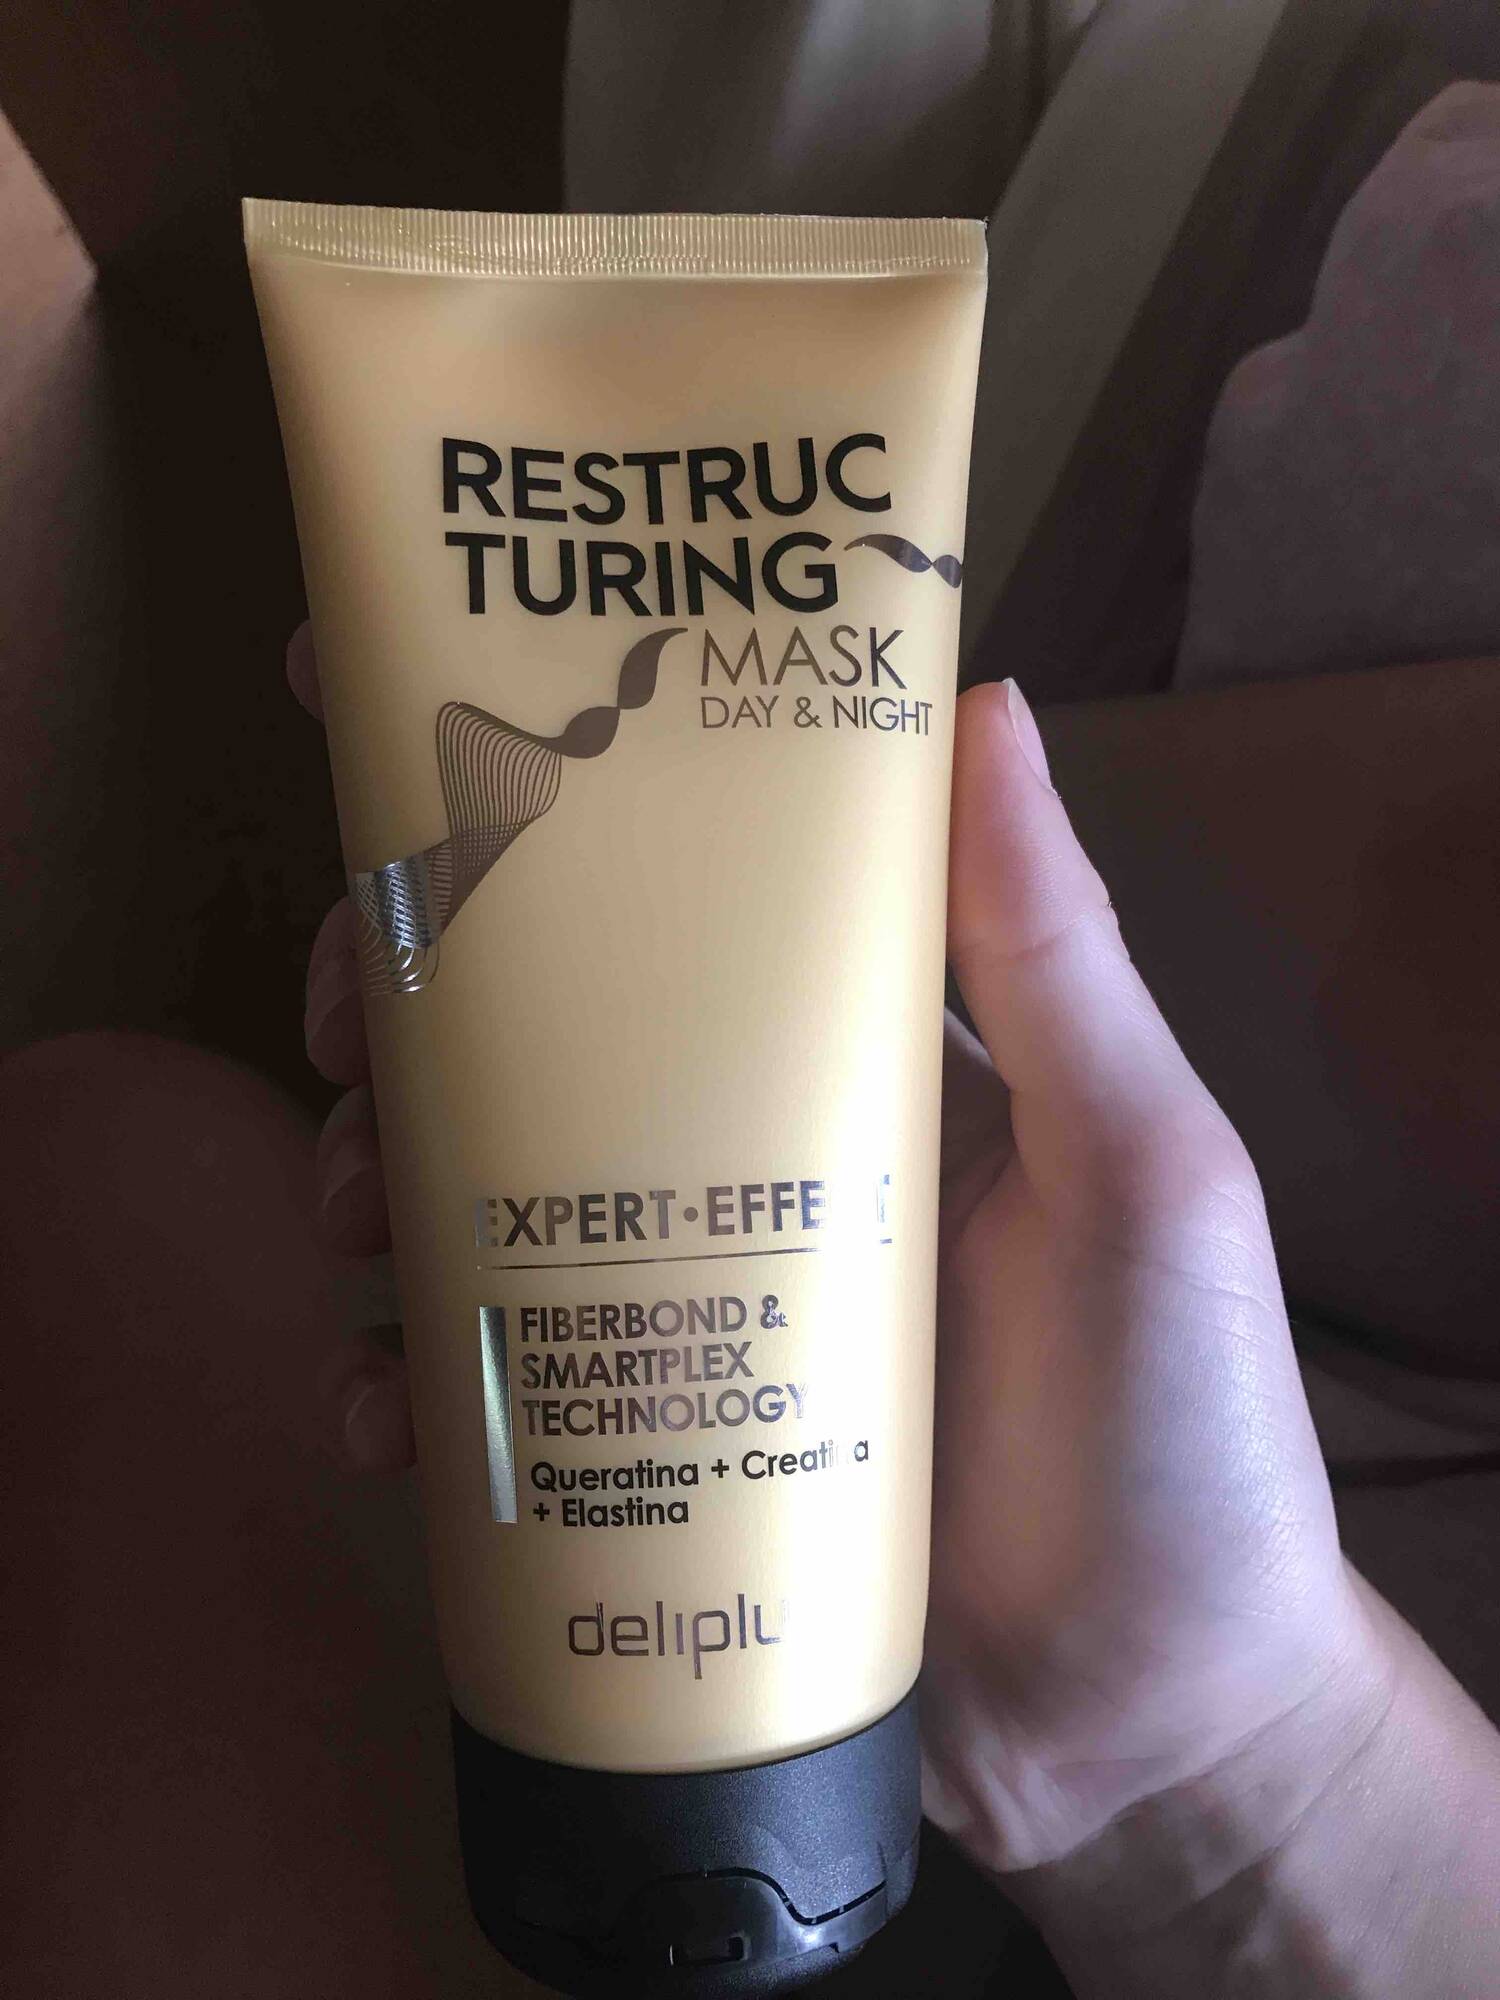 DELIPLUS - Restructuring - Mask day & night